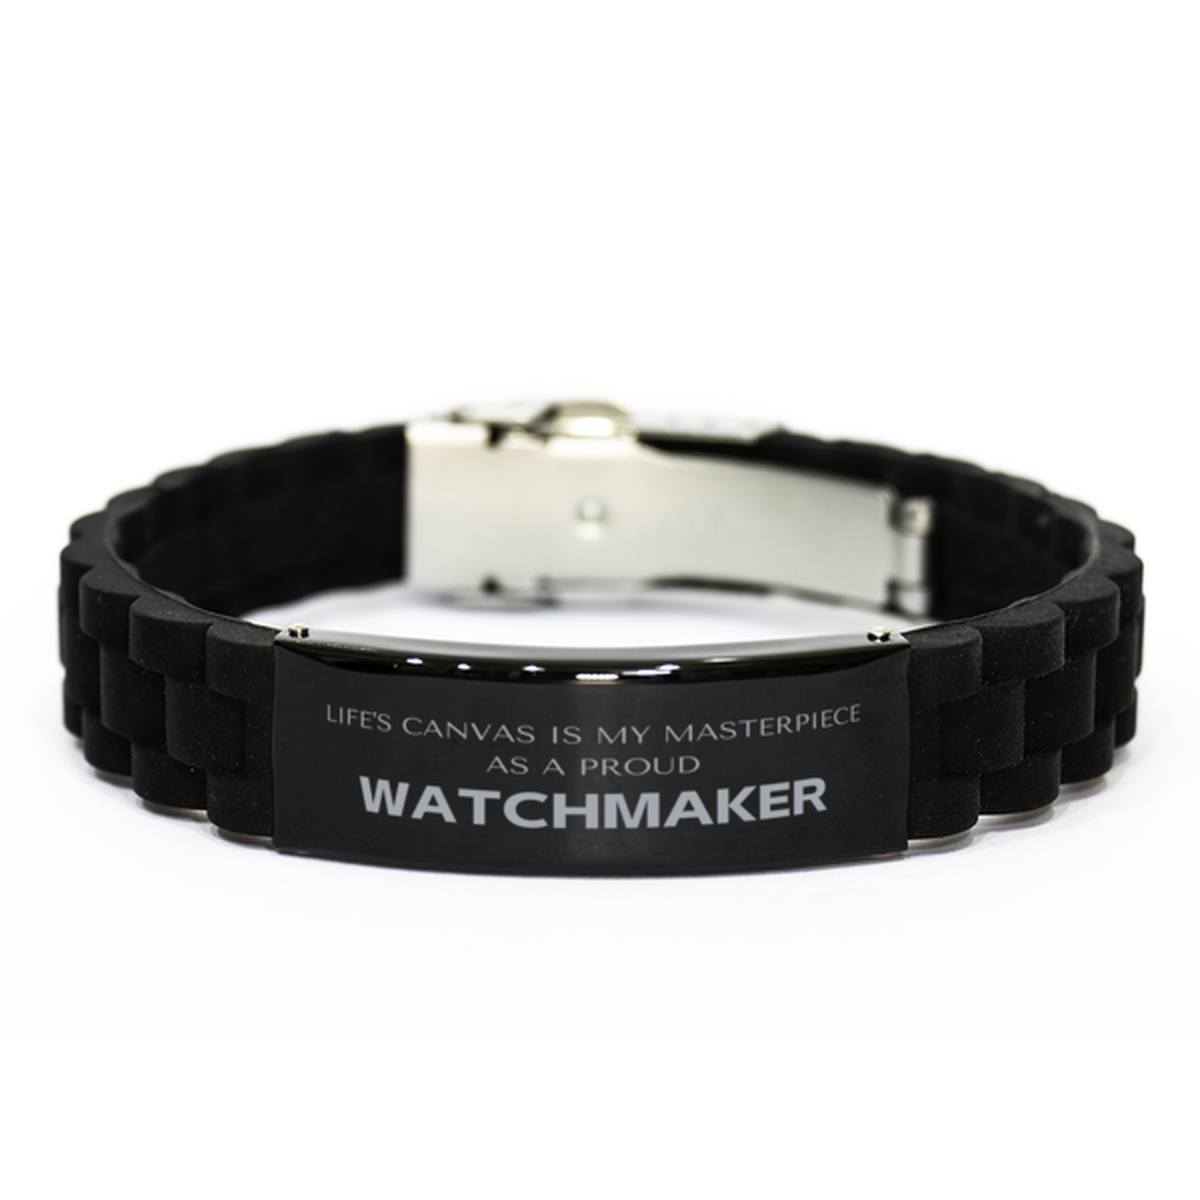 Proud Watchmaker Gifts, Life's canvas is my masterpiece, Epic Birthday Christmas Unique Black Glidelock Clasp Bracelet For Watchmaker, Coworkers, Men, Women, Friends